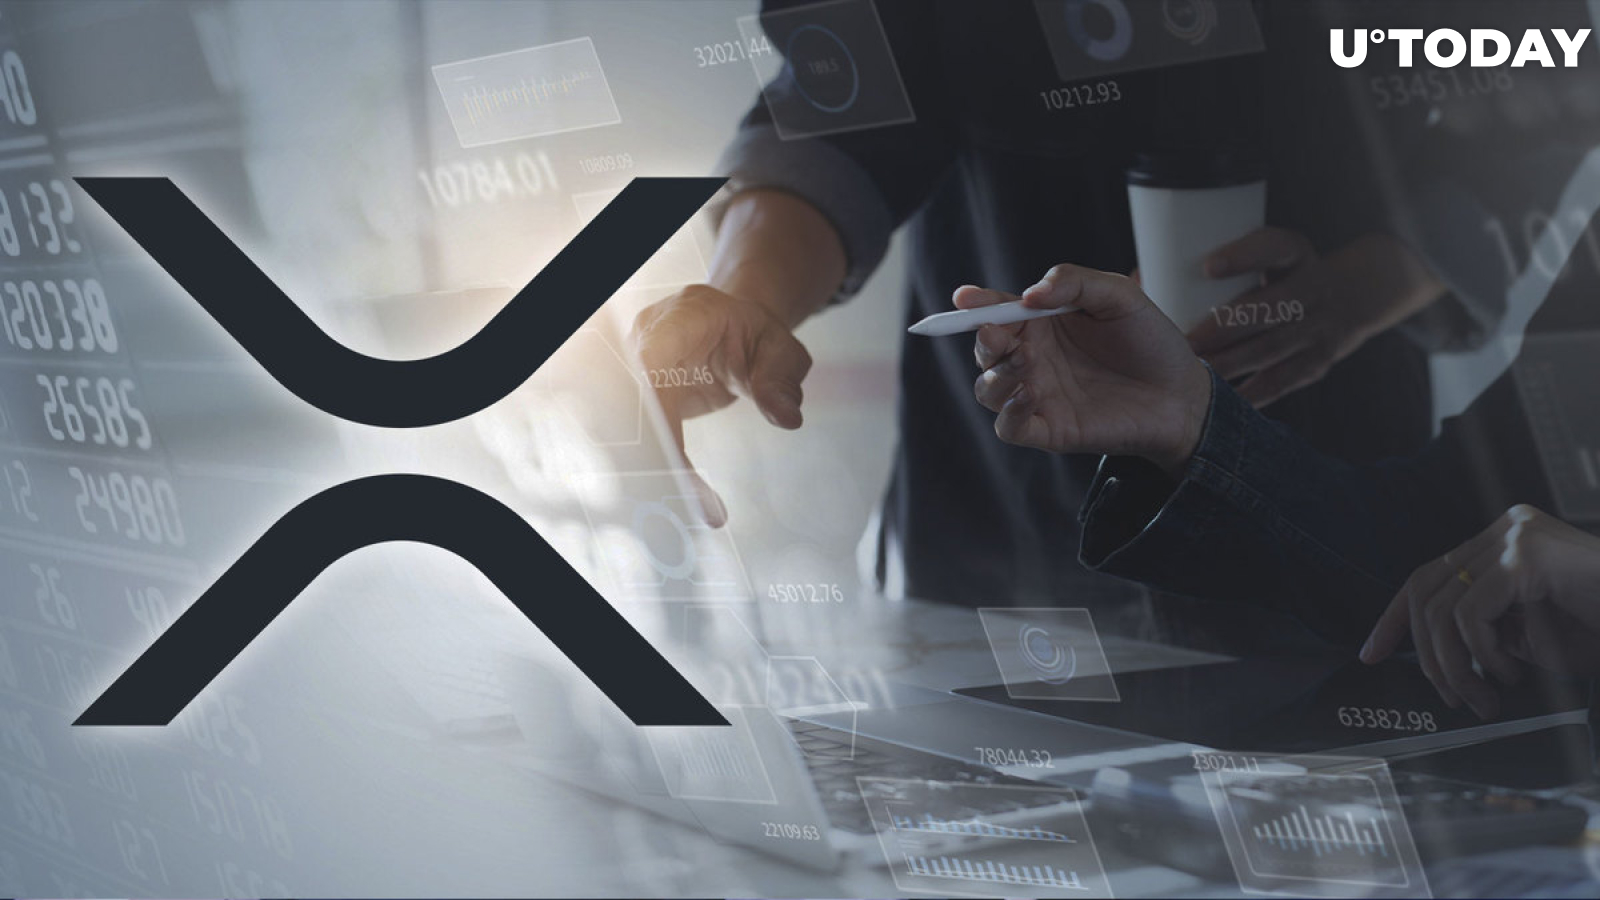 XRP Pump Chances Now Higher Than Usual, Santiment Says, But There’s Catch